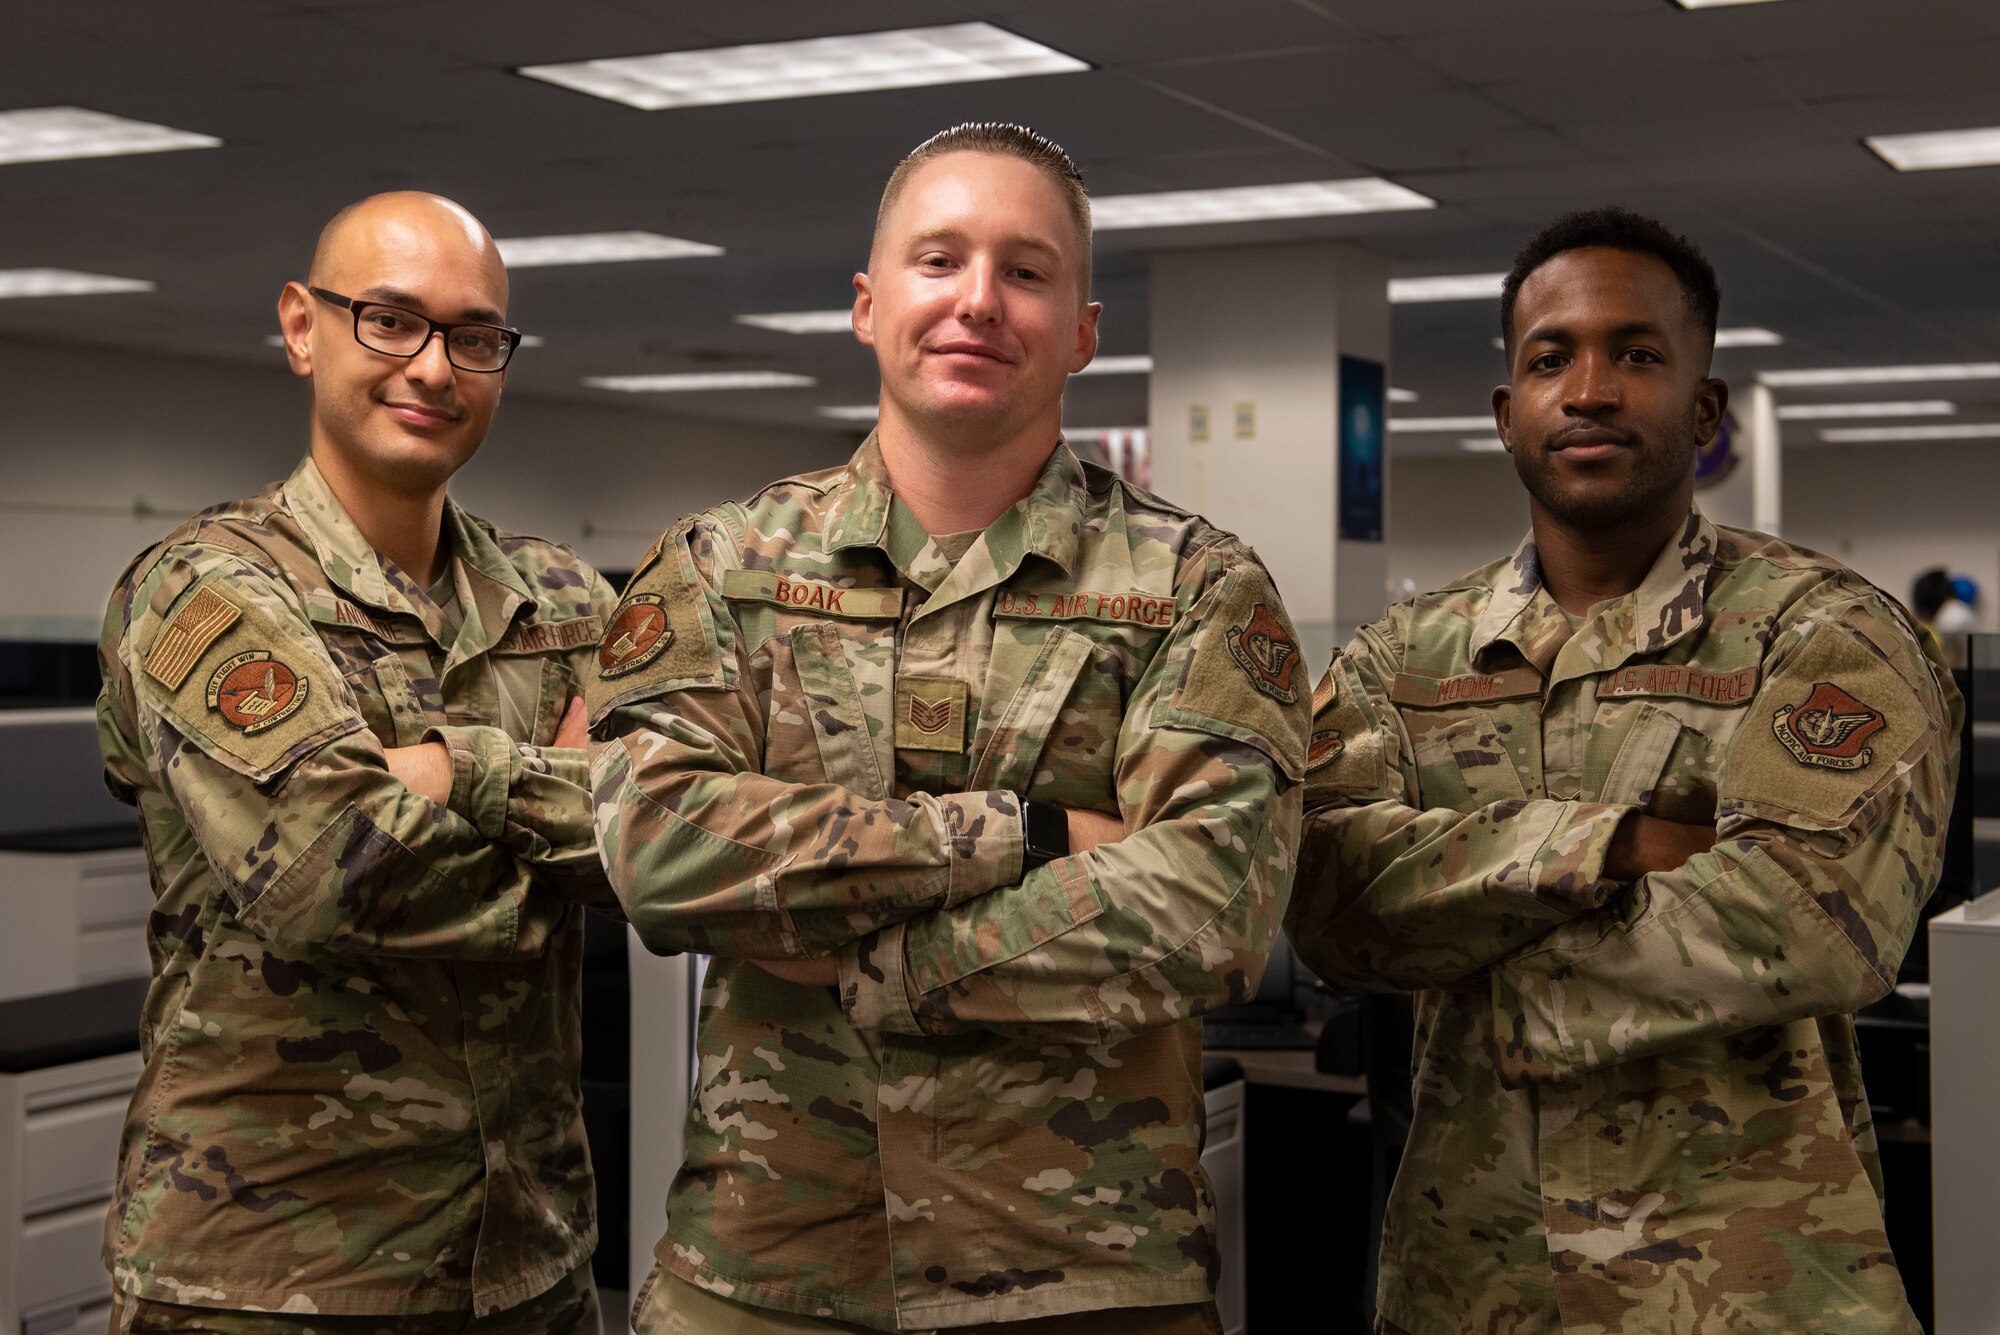 U.S. Air Force Airman 1st Class Pedro Andrada, left, Tech. Sgt. Joshua Boak, center, and Airman 1st Class Devin Moone, right, all assigned to the 36th Contracting Squadron, pose for a photo at Andersen Air Force Base, Guam, July 22, 2021. The 36th CONS Team recently awarded two contracts worth a total of $64,000 to provide the Cook Islands with medical supplies needed for COVID-19 relief. The purchase consisted of medical supplies such as syringes, masks, gloves, blood administration sets, shoe covers and other necessary equipment. (U.S. Air Force photo by Senior Airman Zachary Heal)